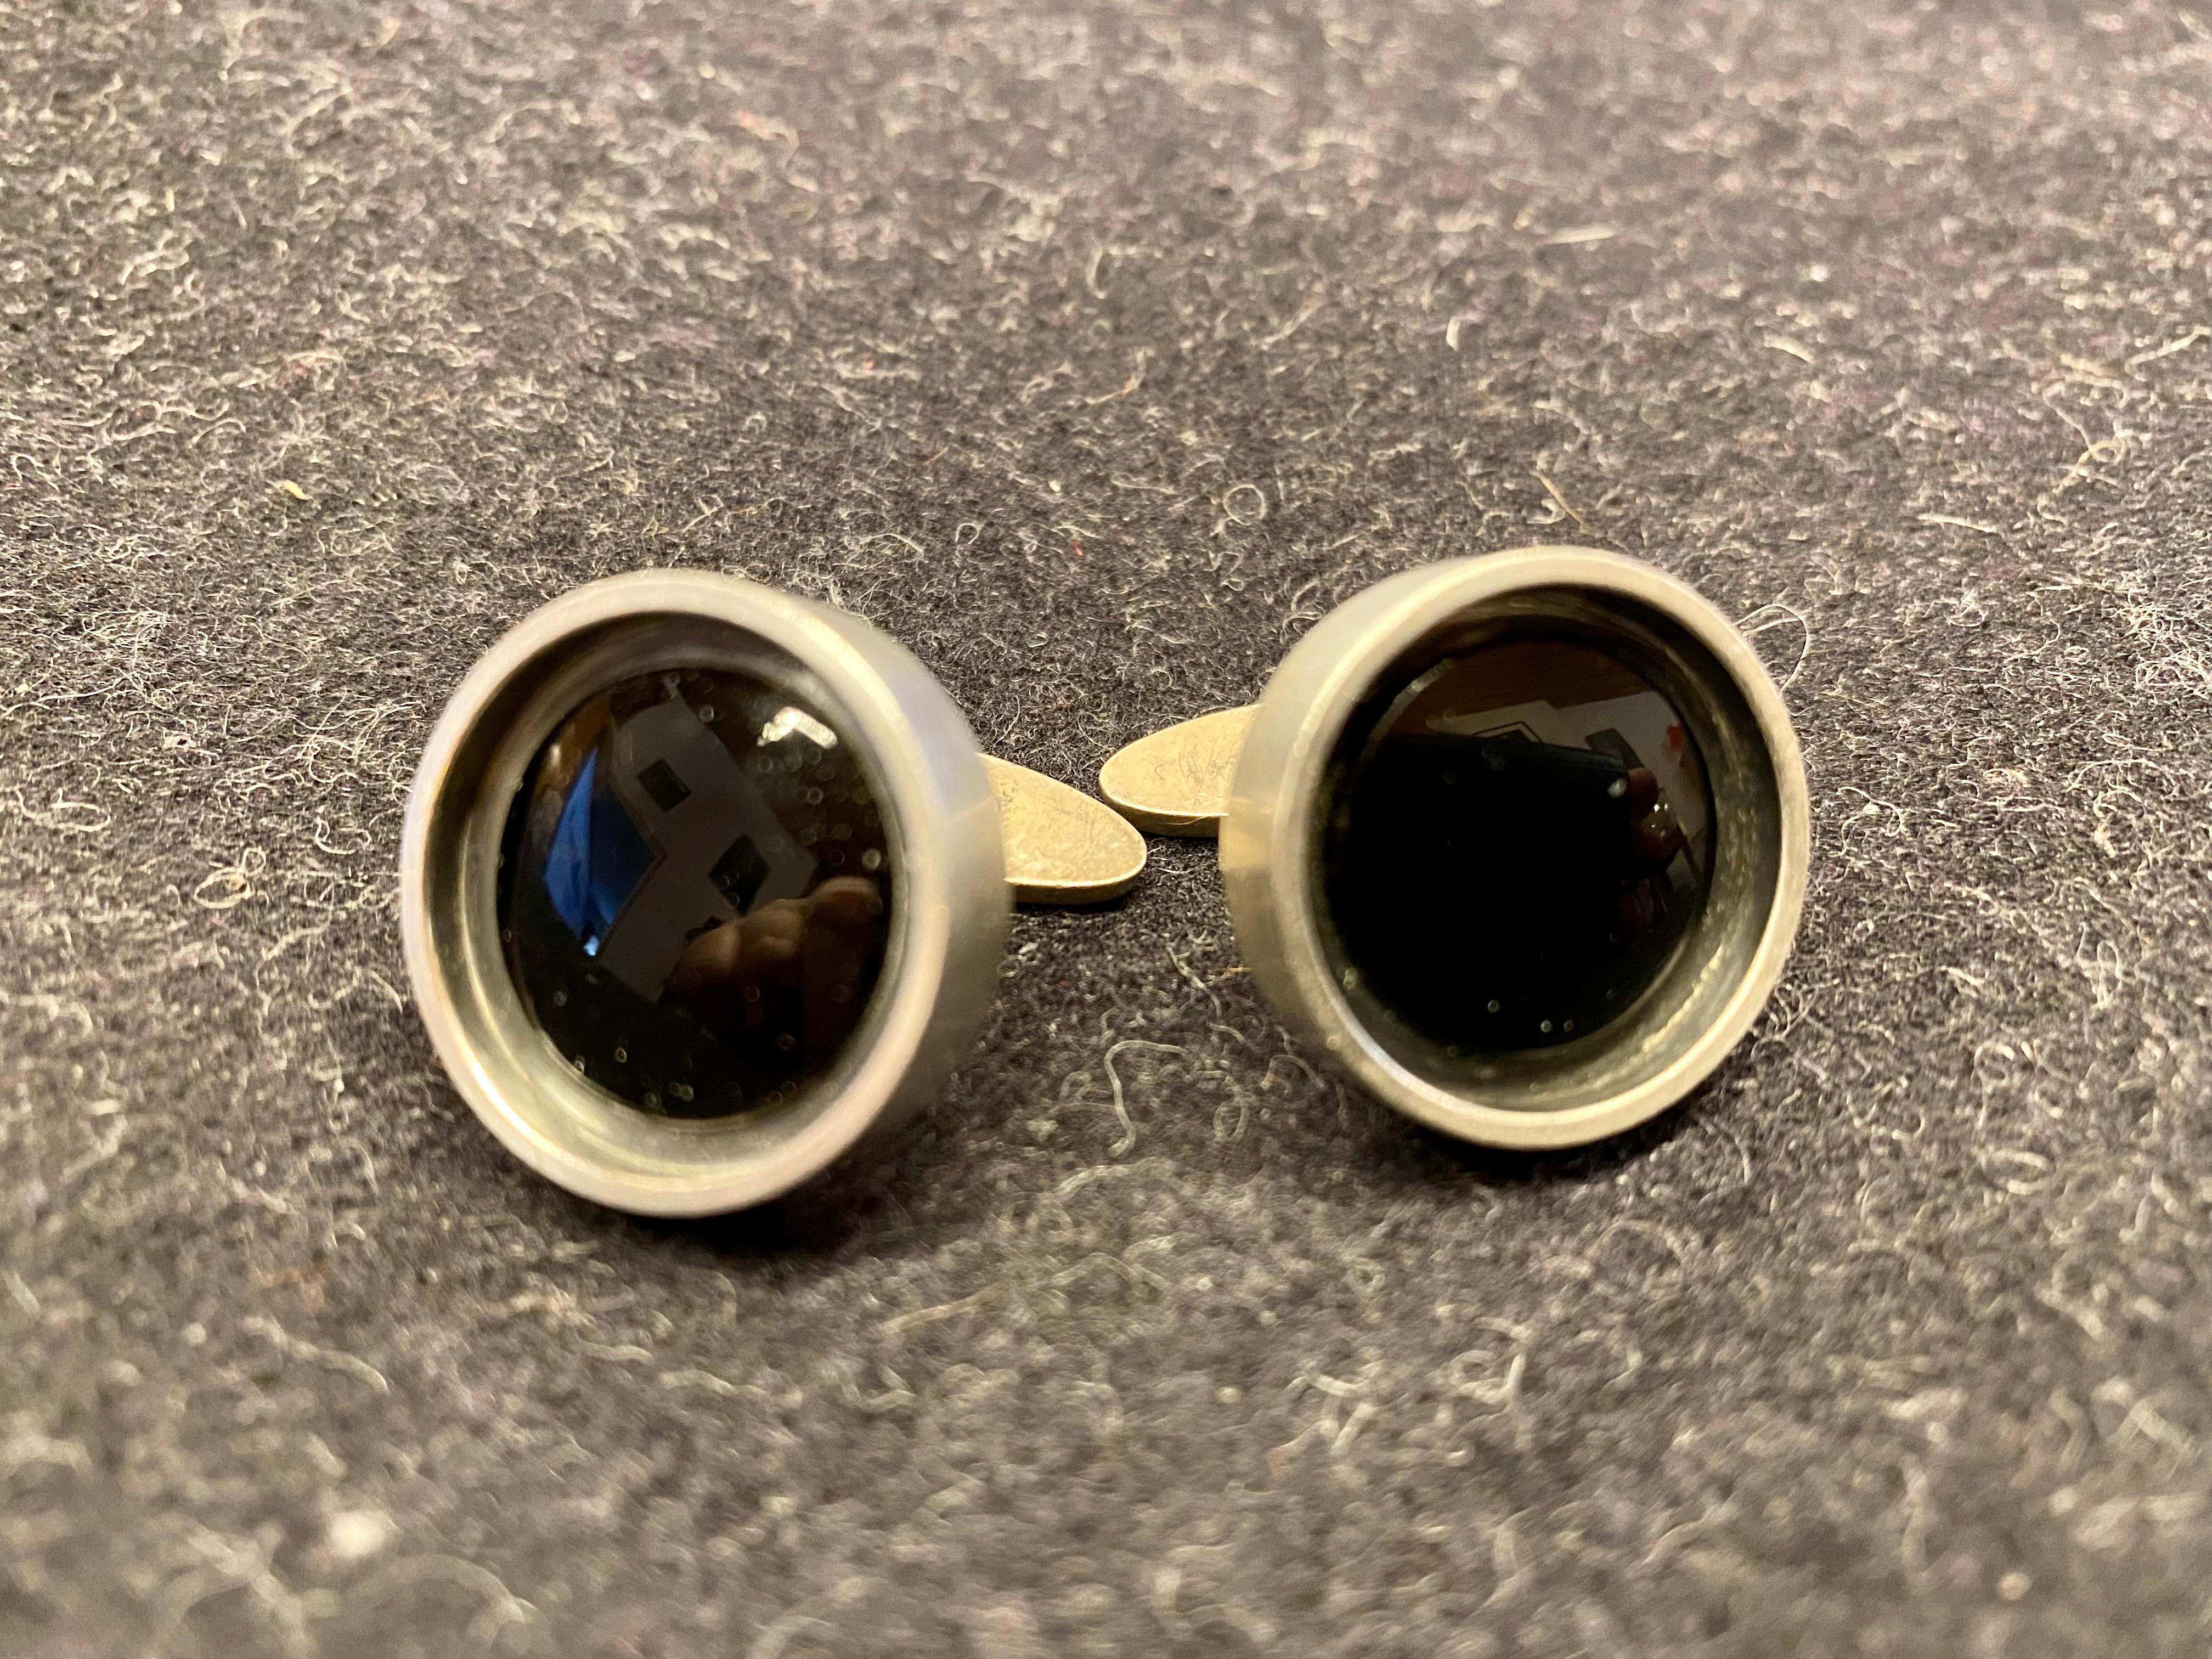 Silver Cufflinks by Elis Kauppi for Kupittaan Kulta, Finland, onyx
Made in Finland 1966
916H Silver
Turku Finland.
Engraving the letters HM.
It is very delicately made, can be easily sanded off if needed.